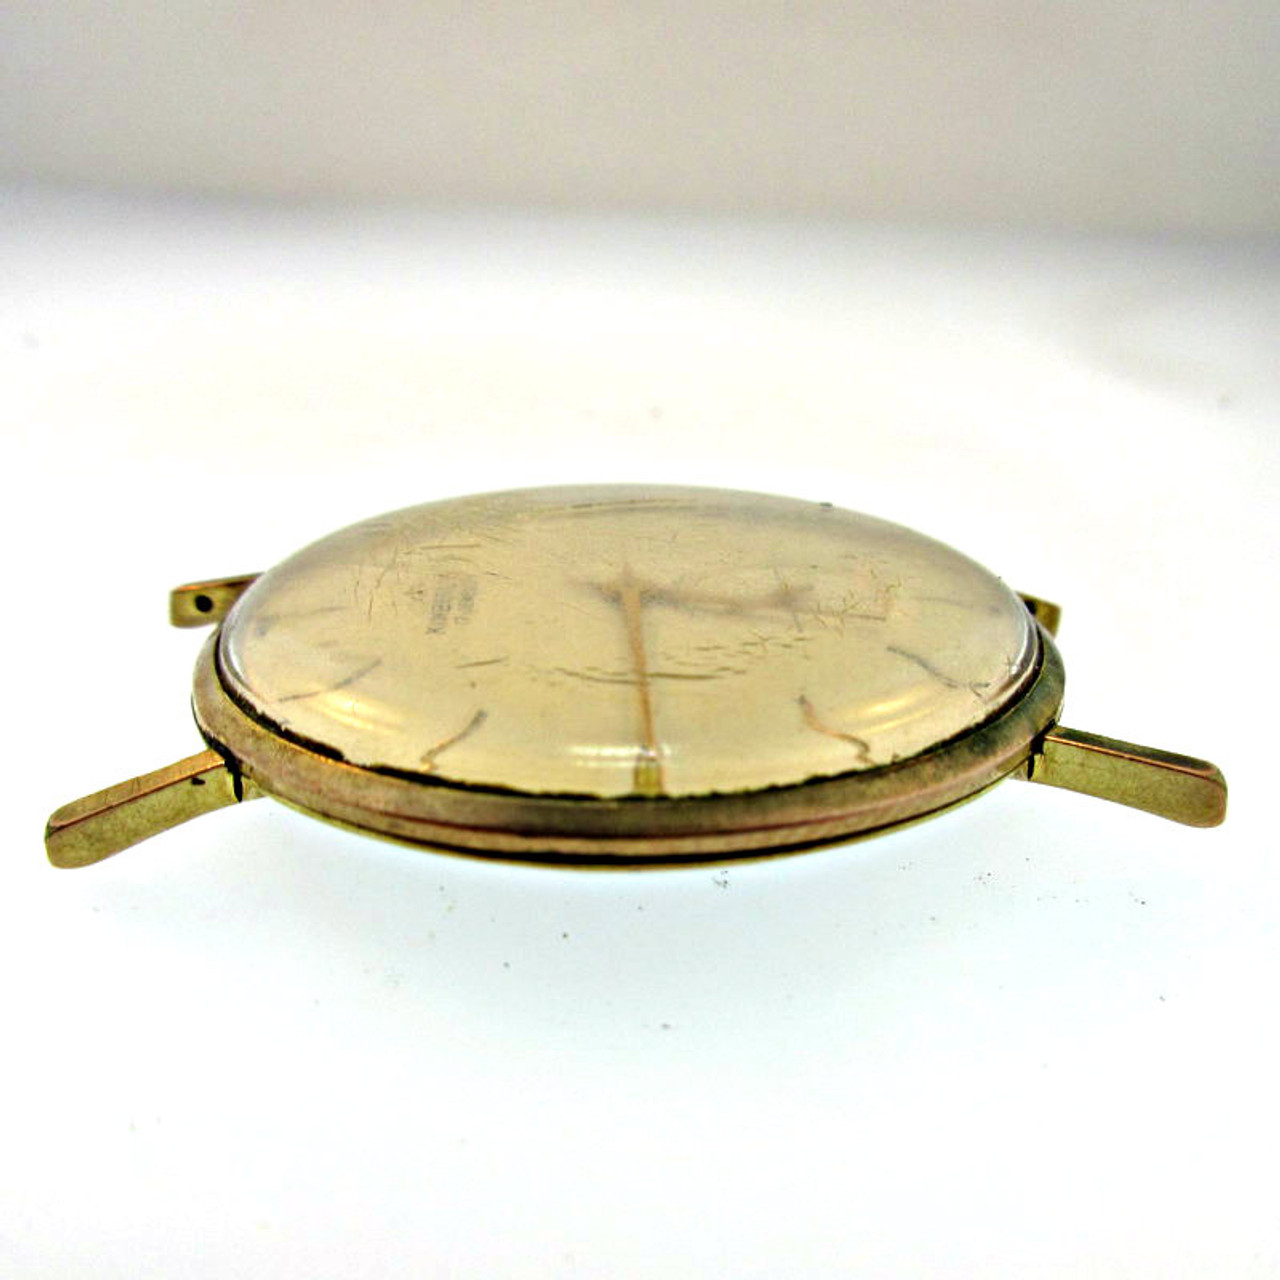 Vintage Harper Watch Co. Kimberly Incabloc Watch 17 Jewel Movement and ...